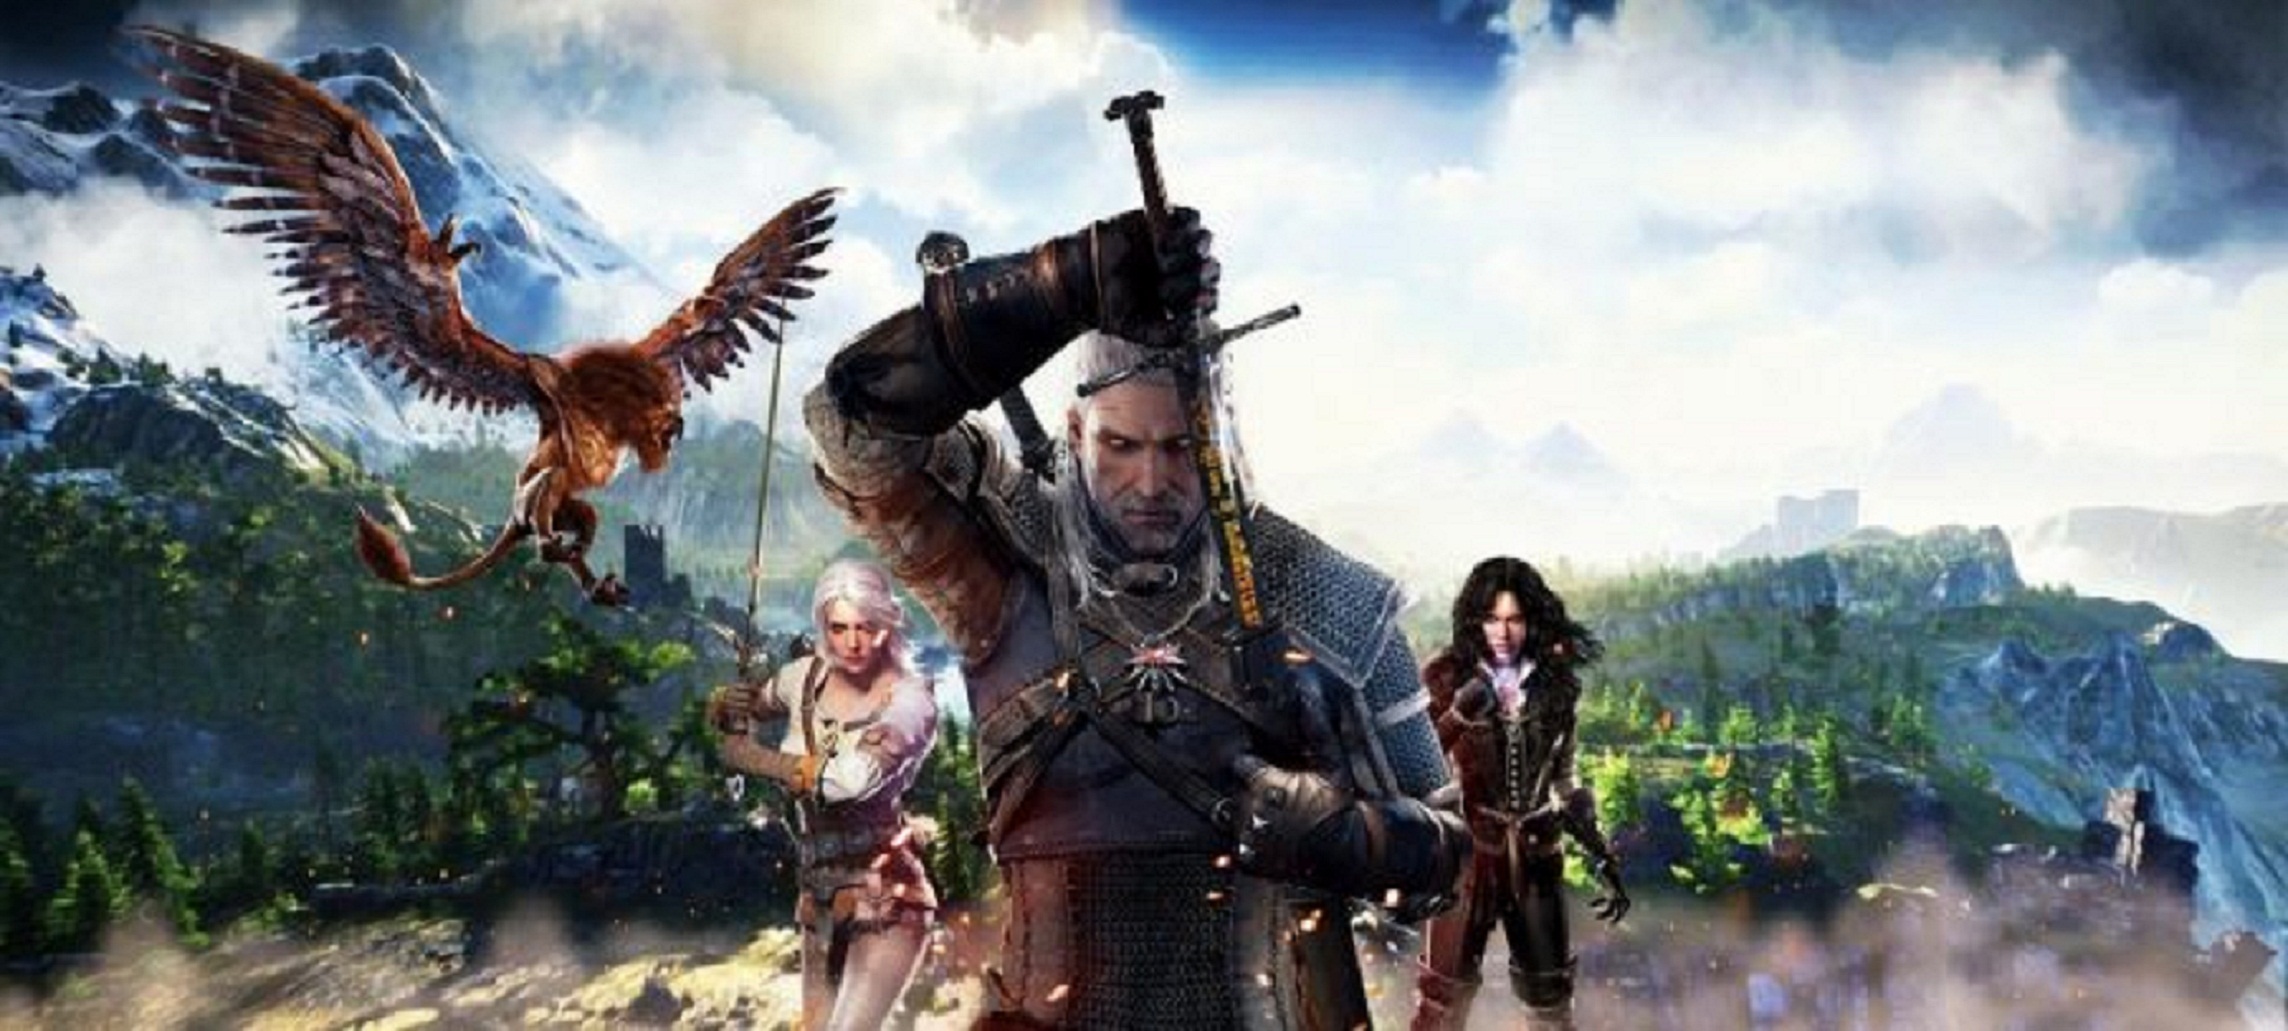 CD Projekt Offers The Witcher: Enhanced Edition For Free To All GOG Galaxy Users